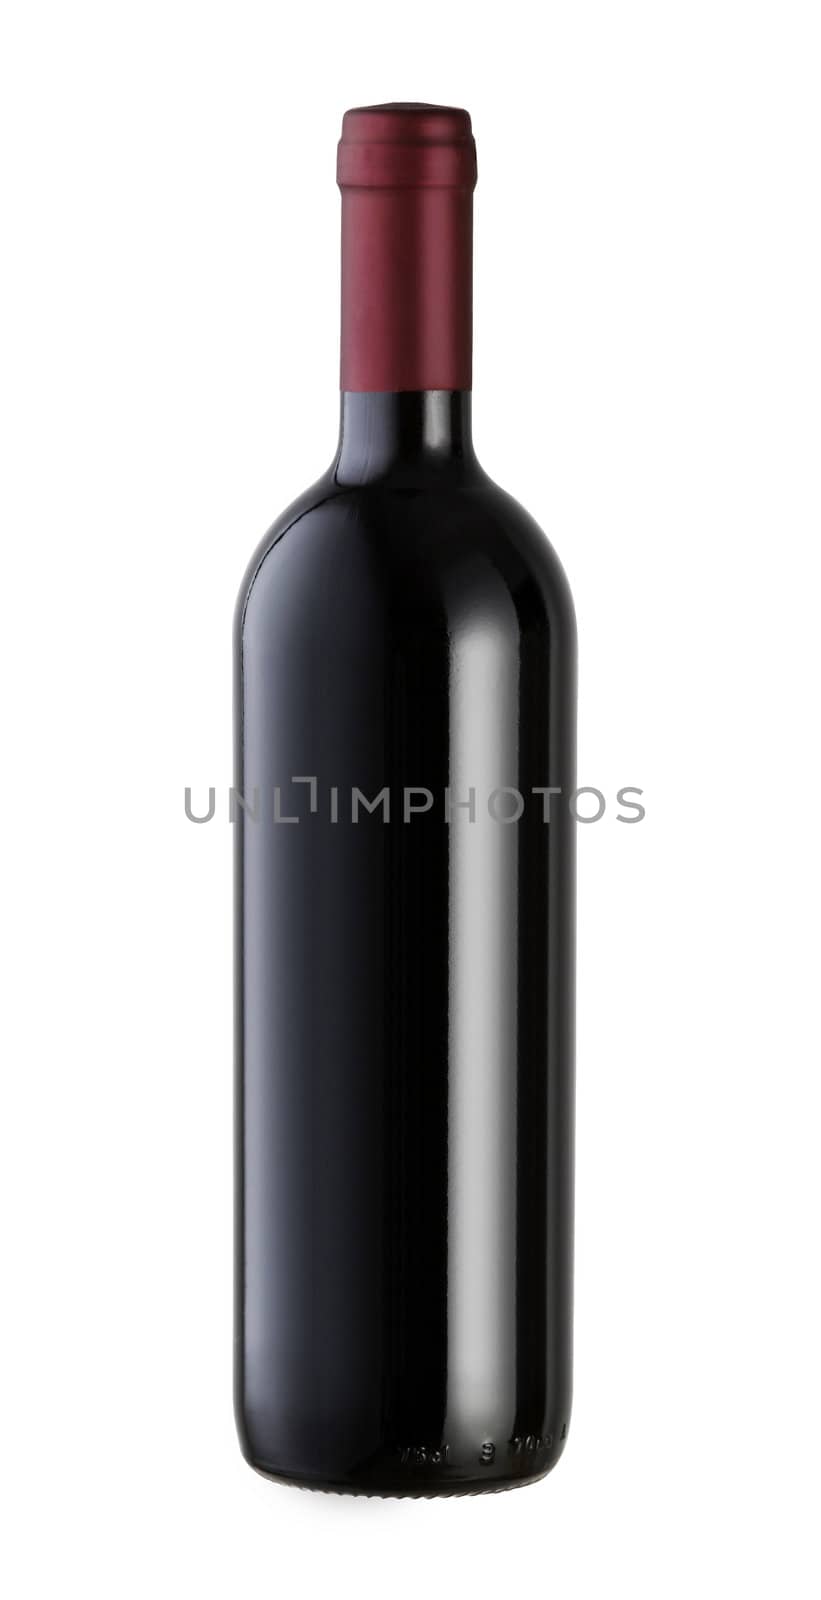 A bottle of red wine with a blank label, isolated on white with clipping path.